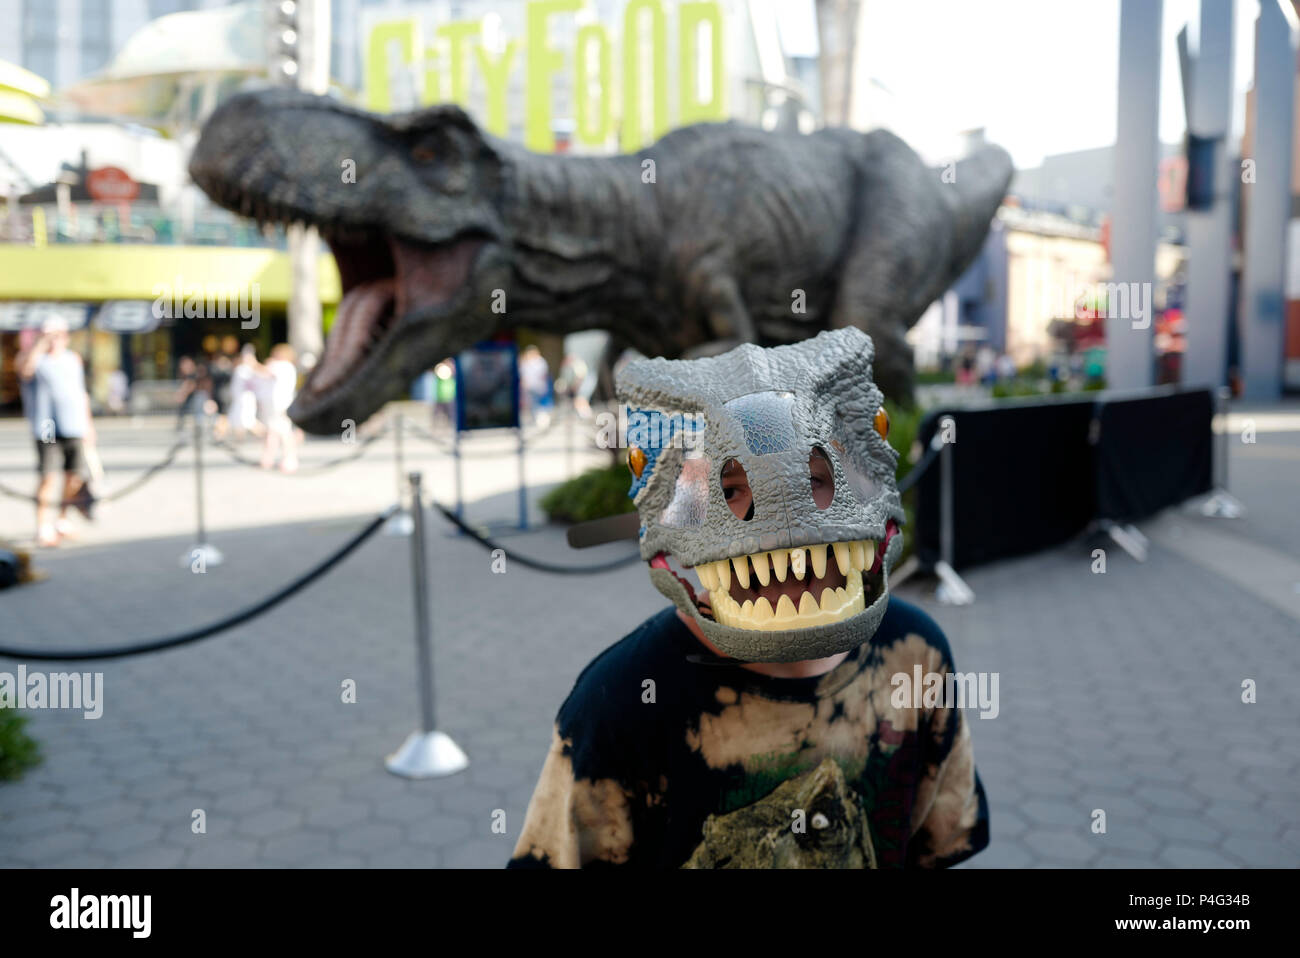 Los Angeles, USA. 21st June, 2018. A boy with a dinosaur mask poses for pictures with a giant Tyrannosaurus rex statue at Universal CityWalk in Los Angeles, the United States, on June 21, 2018. For the promotion of the screening of the new film 'Jurassic World: Fallen Kingdom' on Universal Cinema Theatres, a colossal 3-ton Tyrannosaurus rex, a life-sized Gyrosphere original movie prop, as well as original costume, are displayed for public at Universal CityWalk. Credit: Zhao Hanrong/Xinhua/Alamy Live News Stock Photo